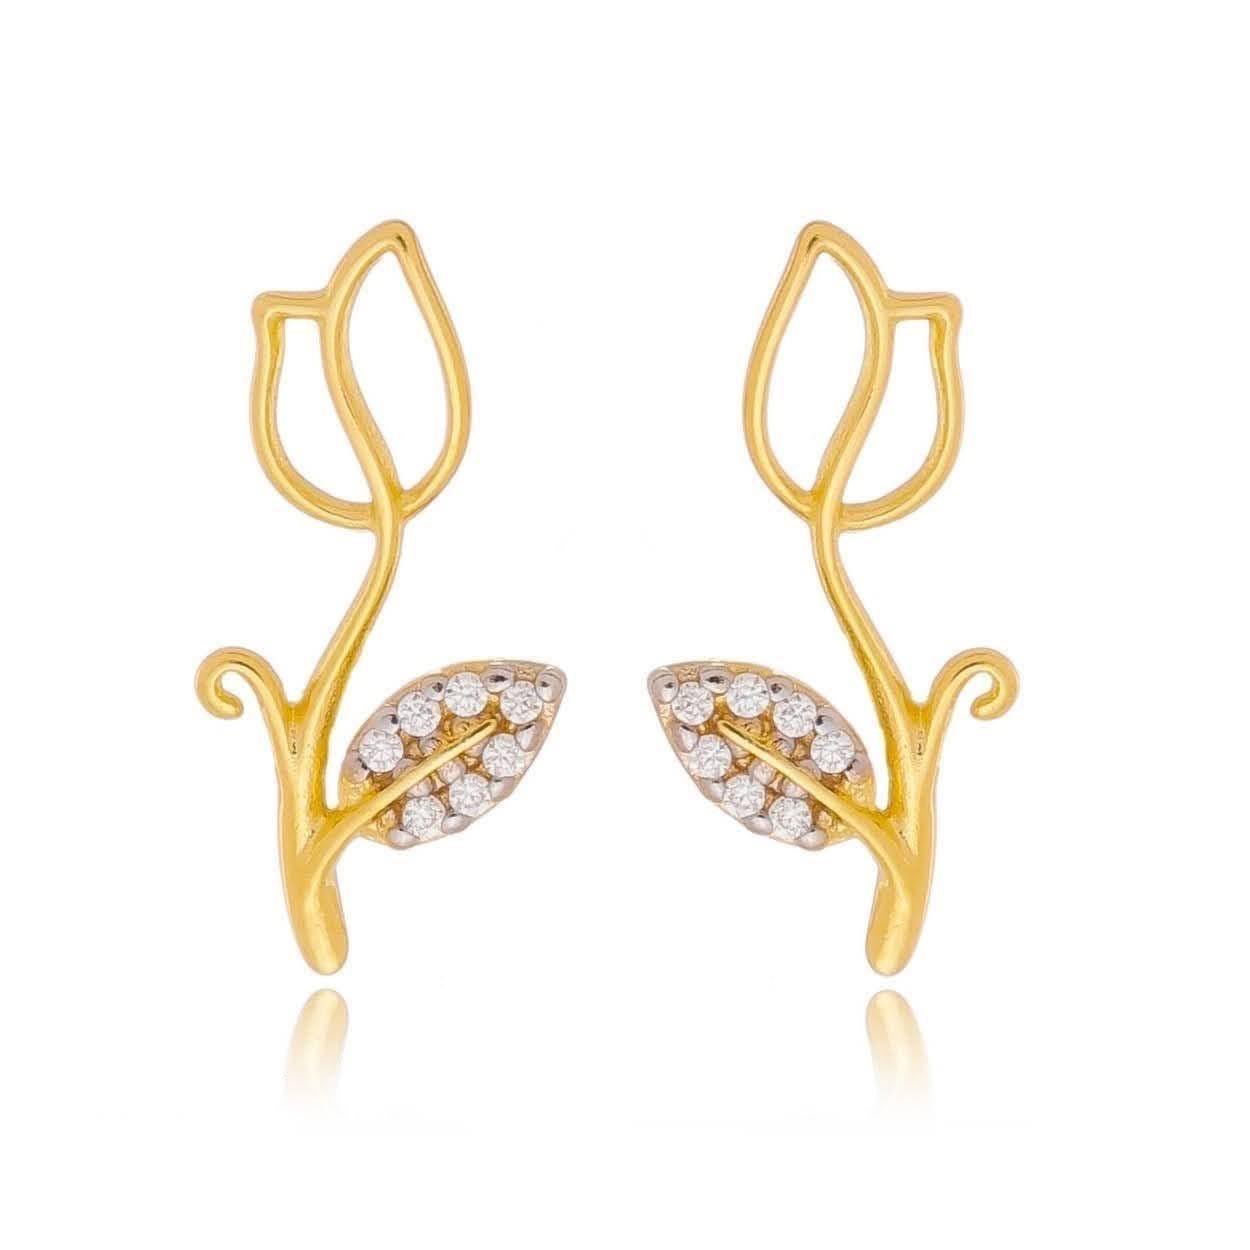 GoldFi 18k Gold Filled Tulip Stud Earrings With Cubic Zirconia Stones